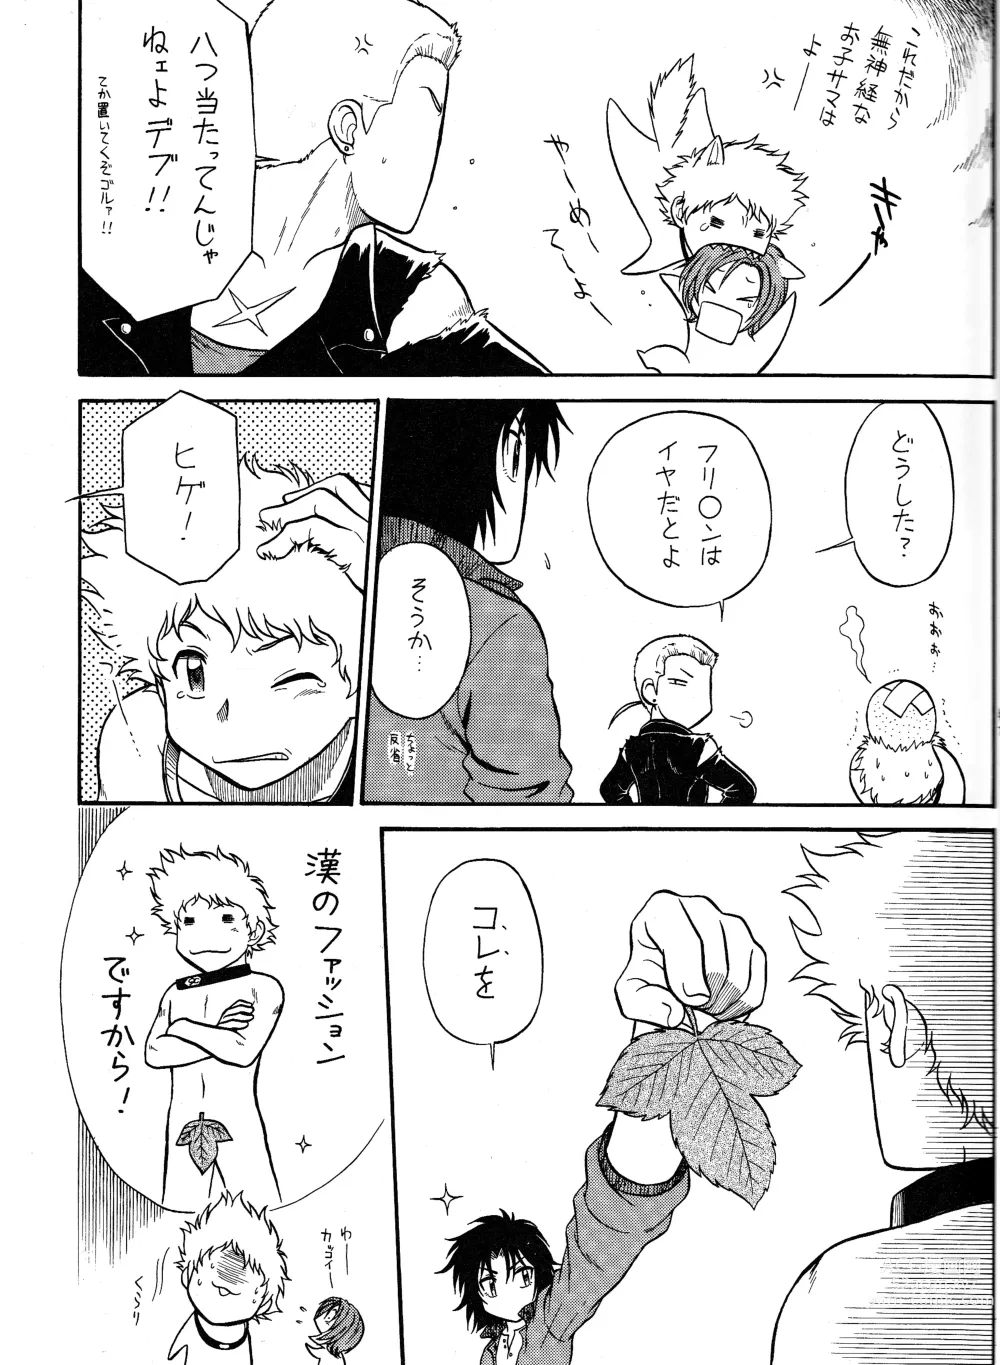 Page 7 of doujinshi K to H